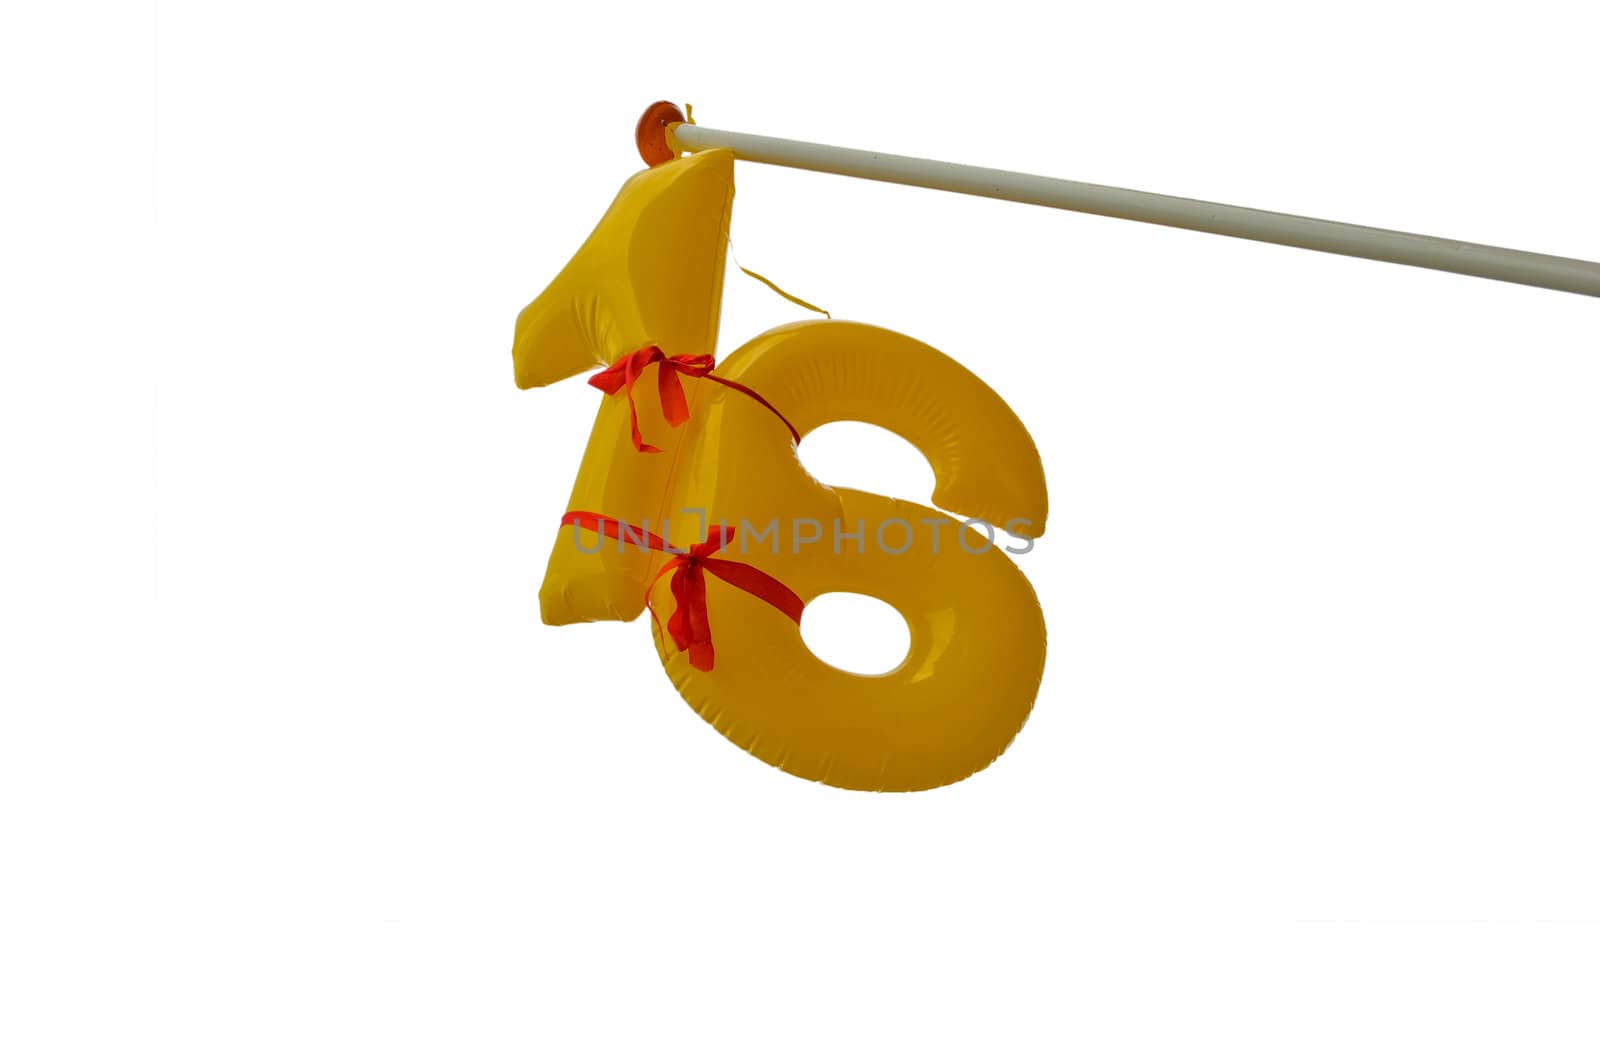 Inflatable number 16 on a flag pole
